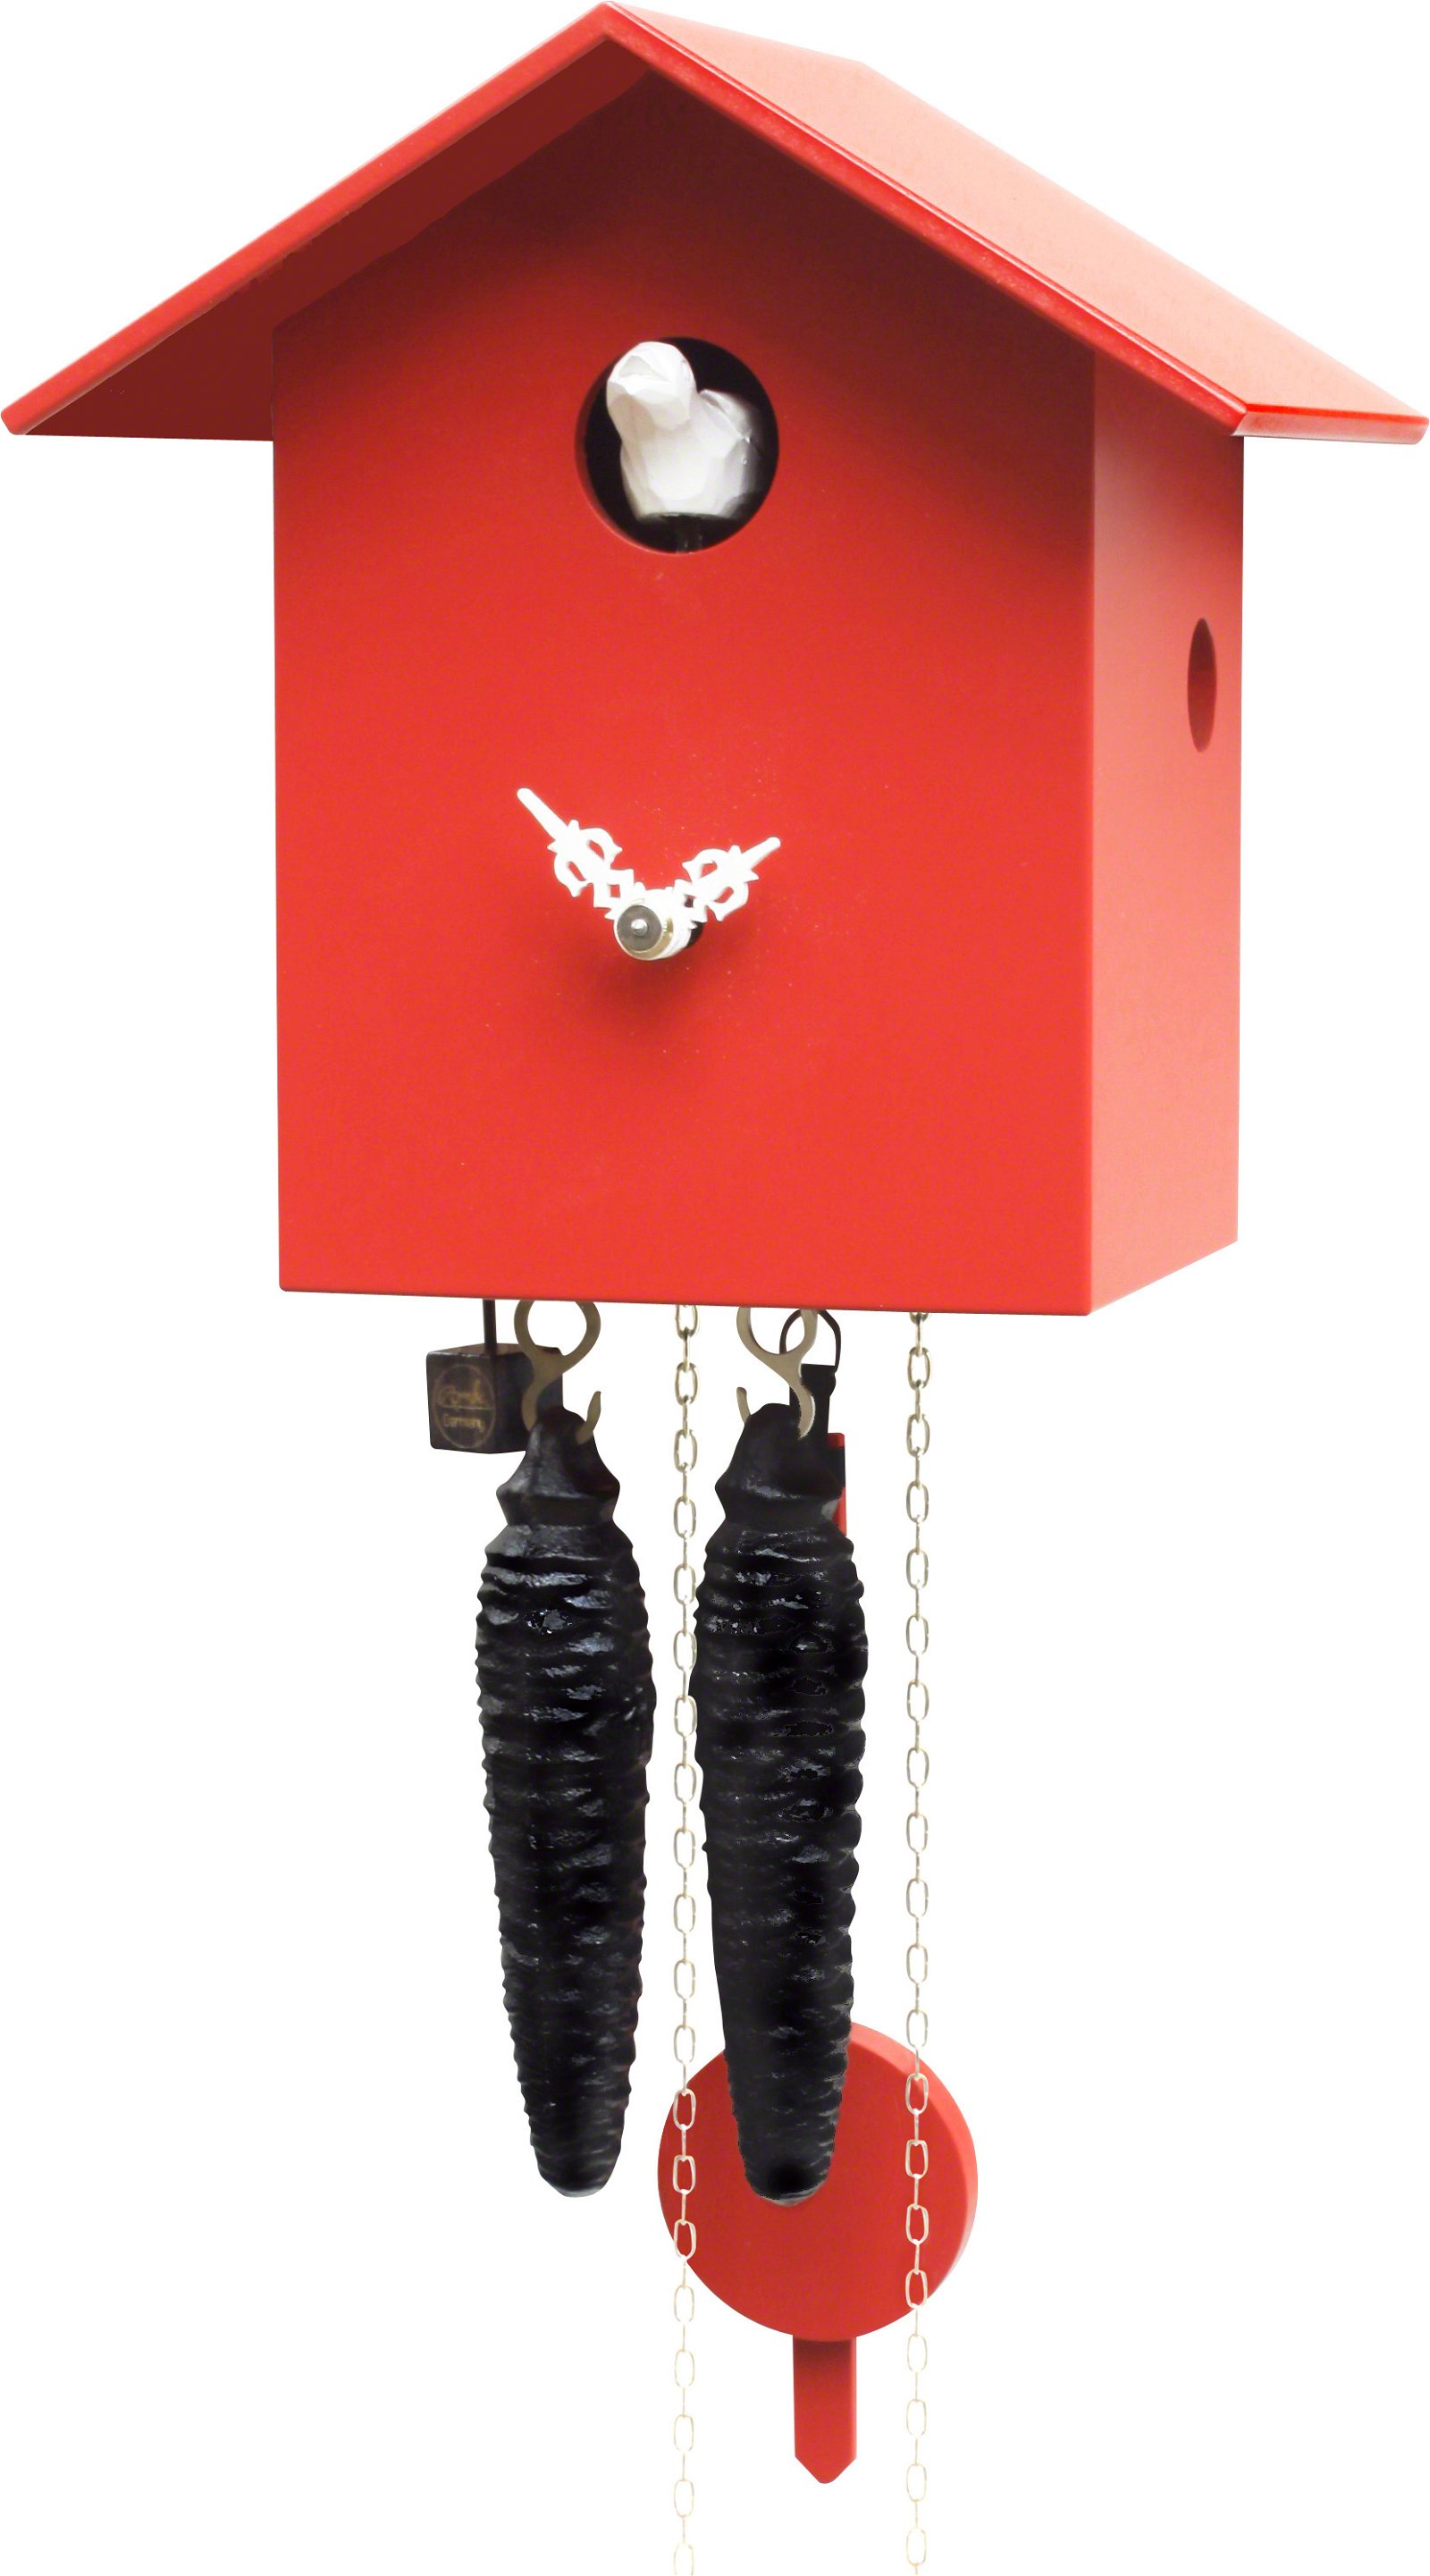 Cuckoo Clock 1-day-movement Modern-Art-Style 18cm by Rombach & Haas